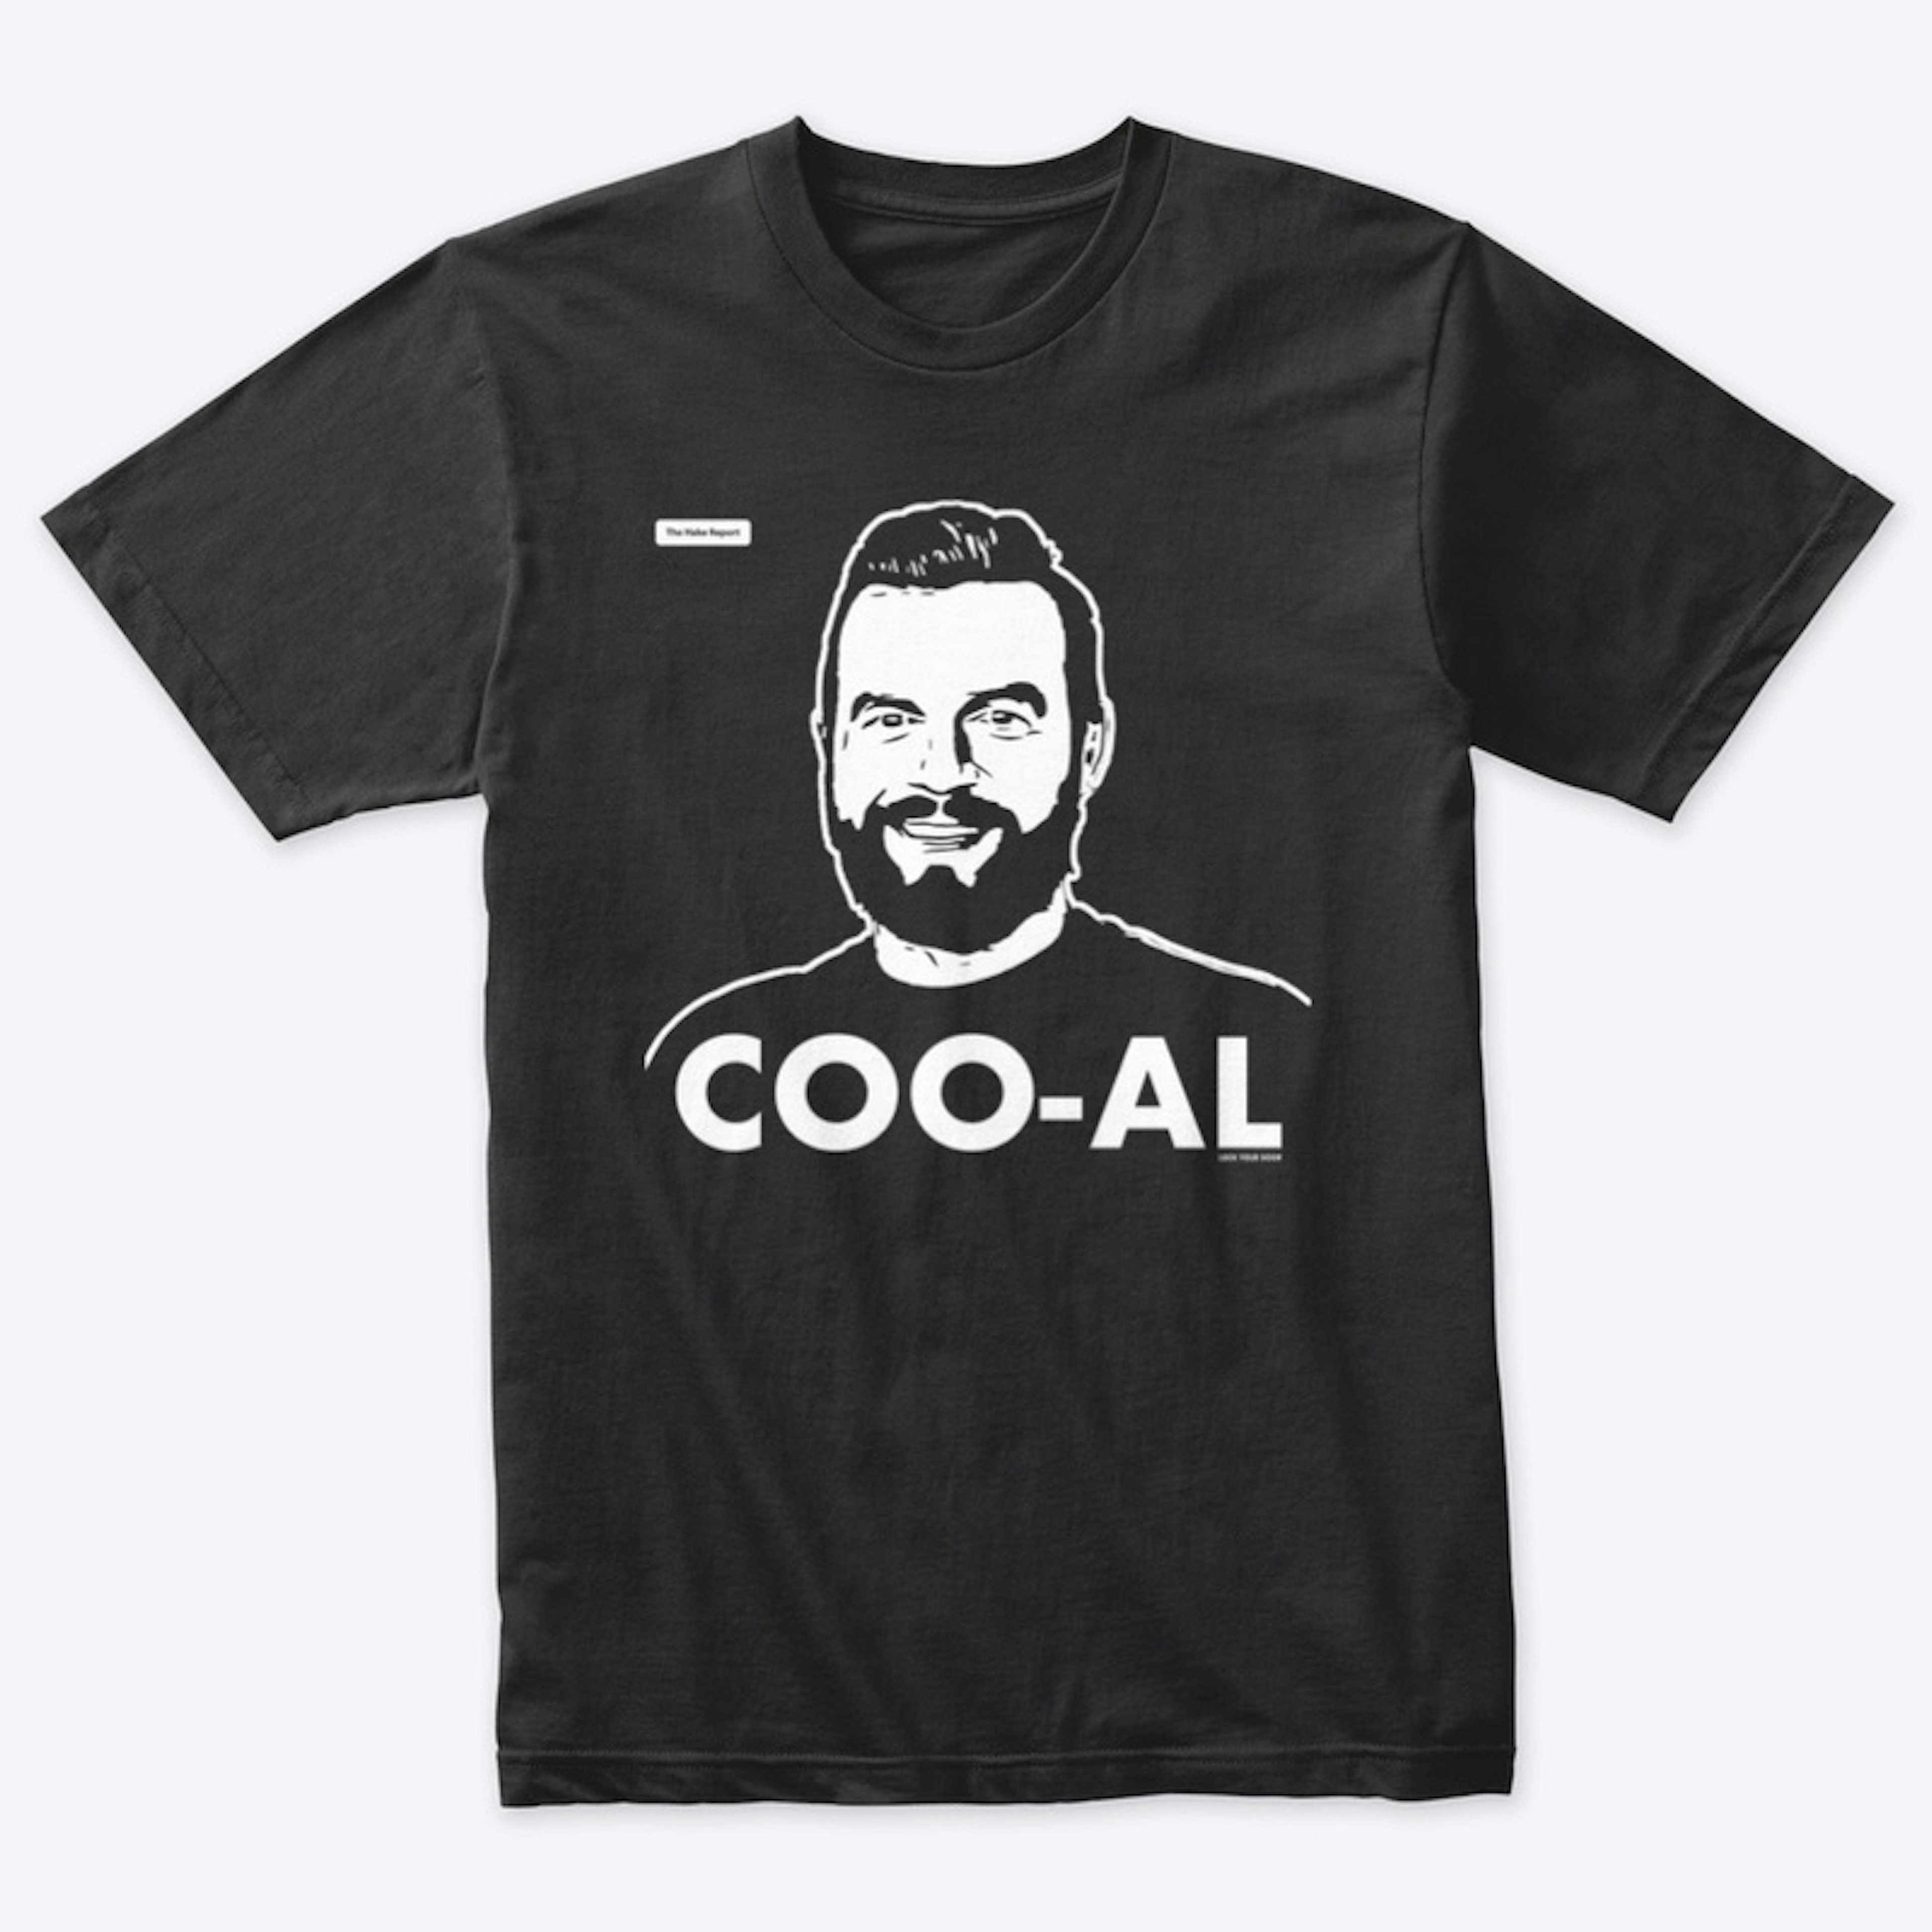 COO-AL (White Ink Only)